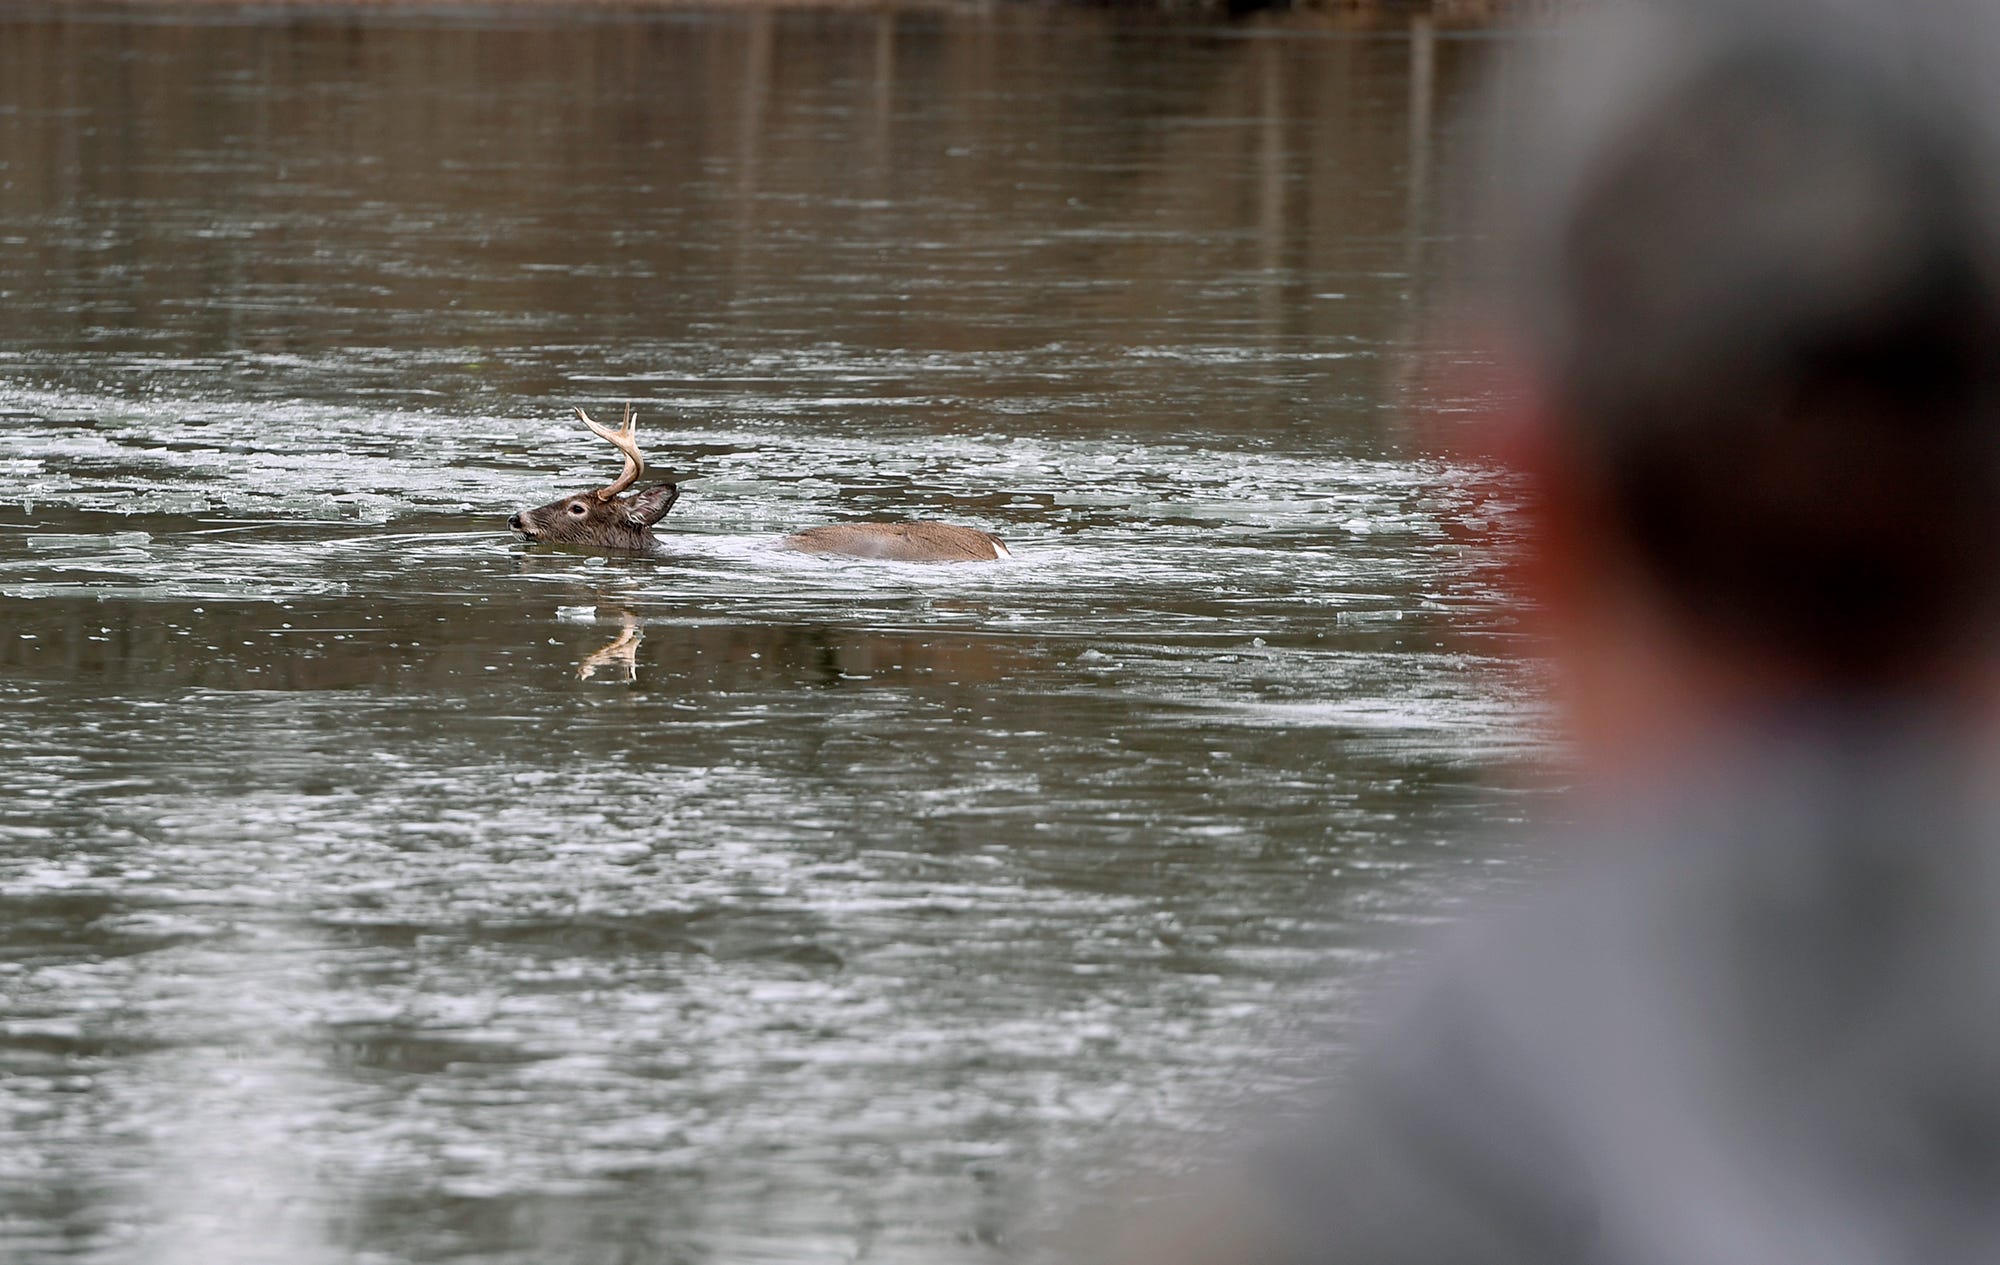 John Stoll Jr. of Wellsville watches a whitetail deer swim to shore after it, along with several others, fell through the ice at Gifford Pinchot State Park, Saturday, January 11, 2019.
John A. Pavoncello photo